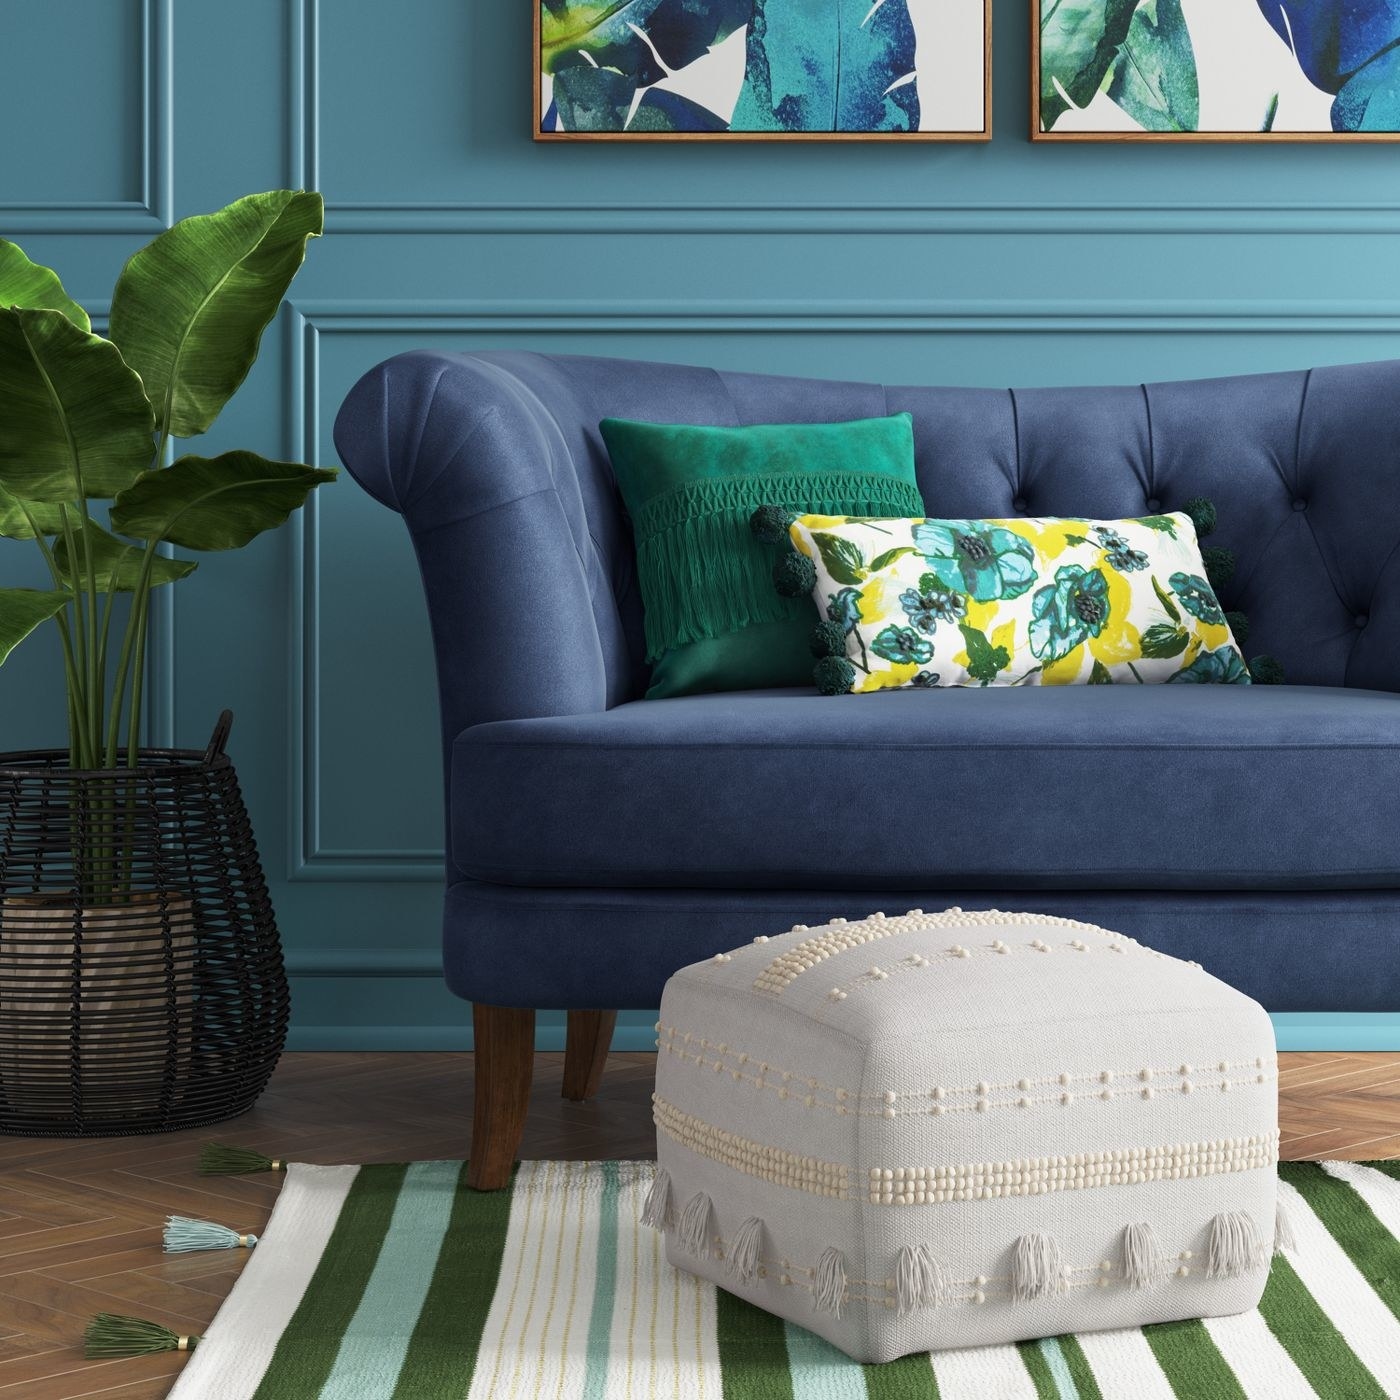 31 Beautiful Pieces Of Furniture And Decor From Target That Are Surprisingly Cheap